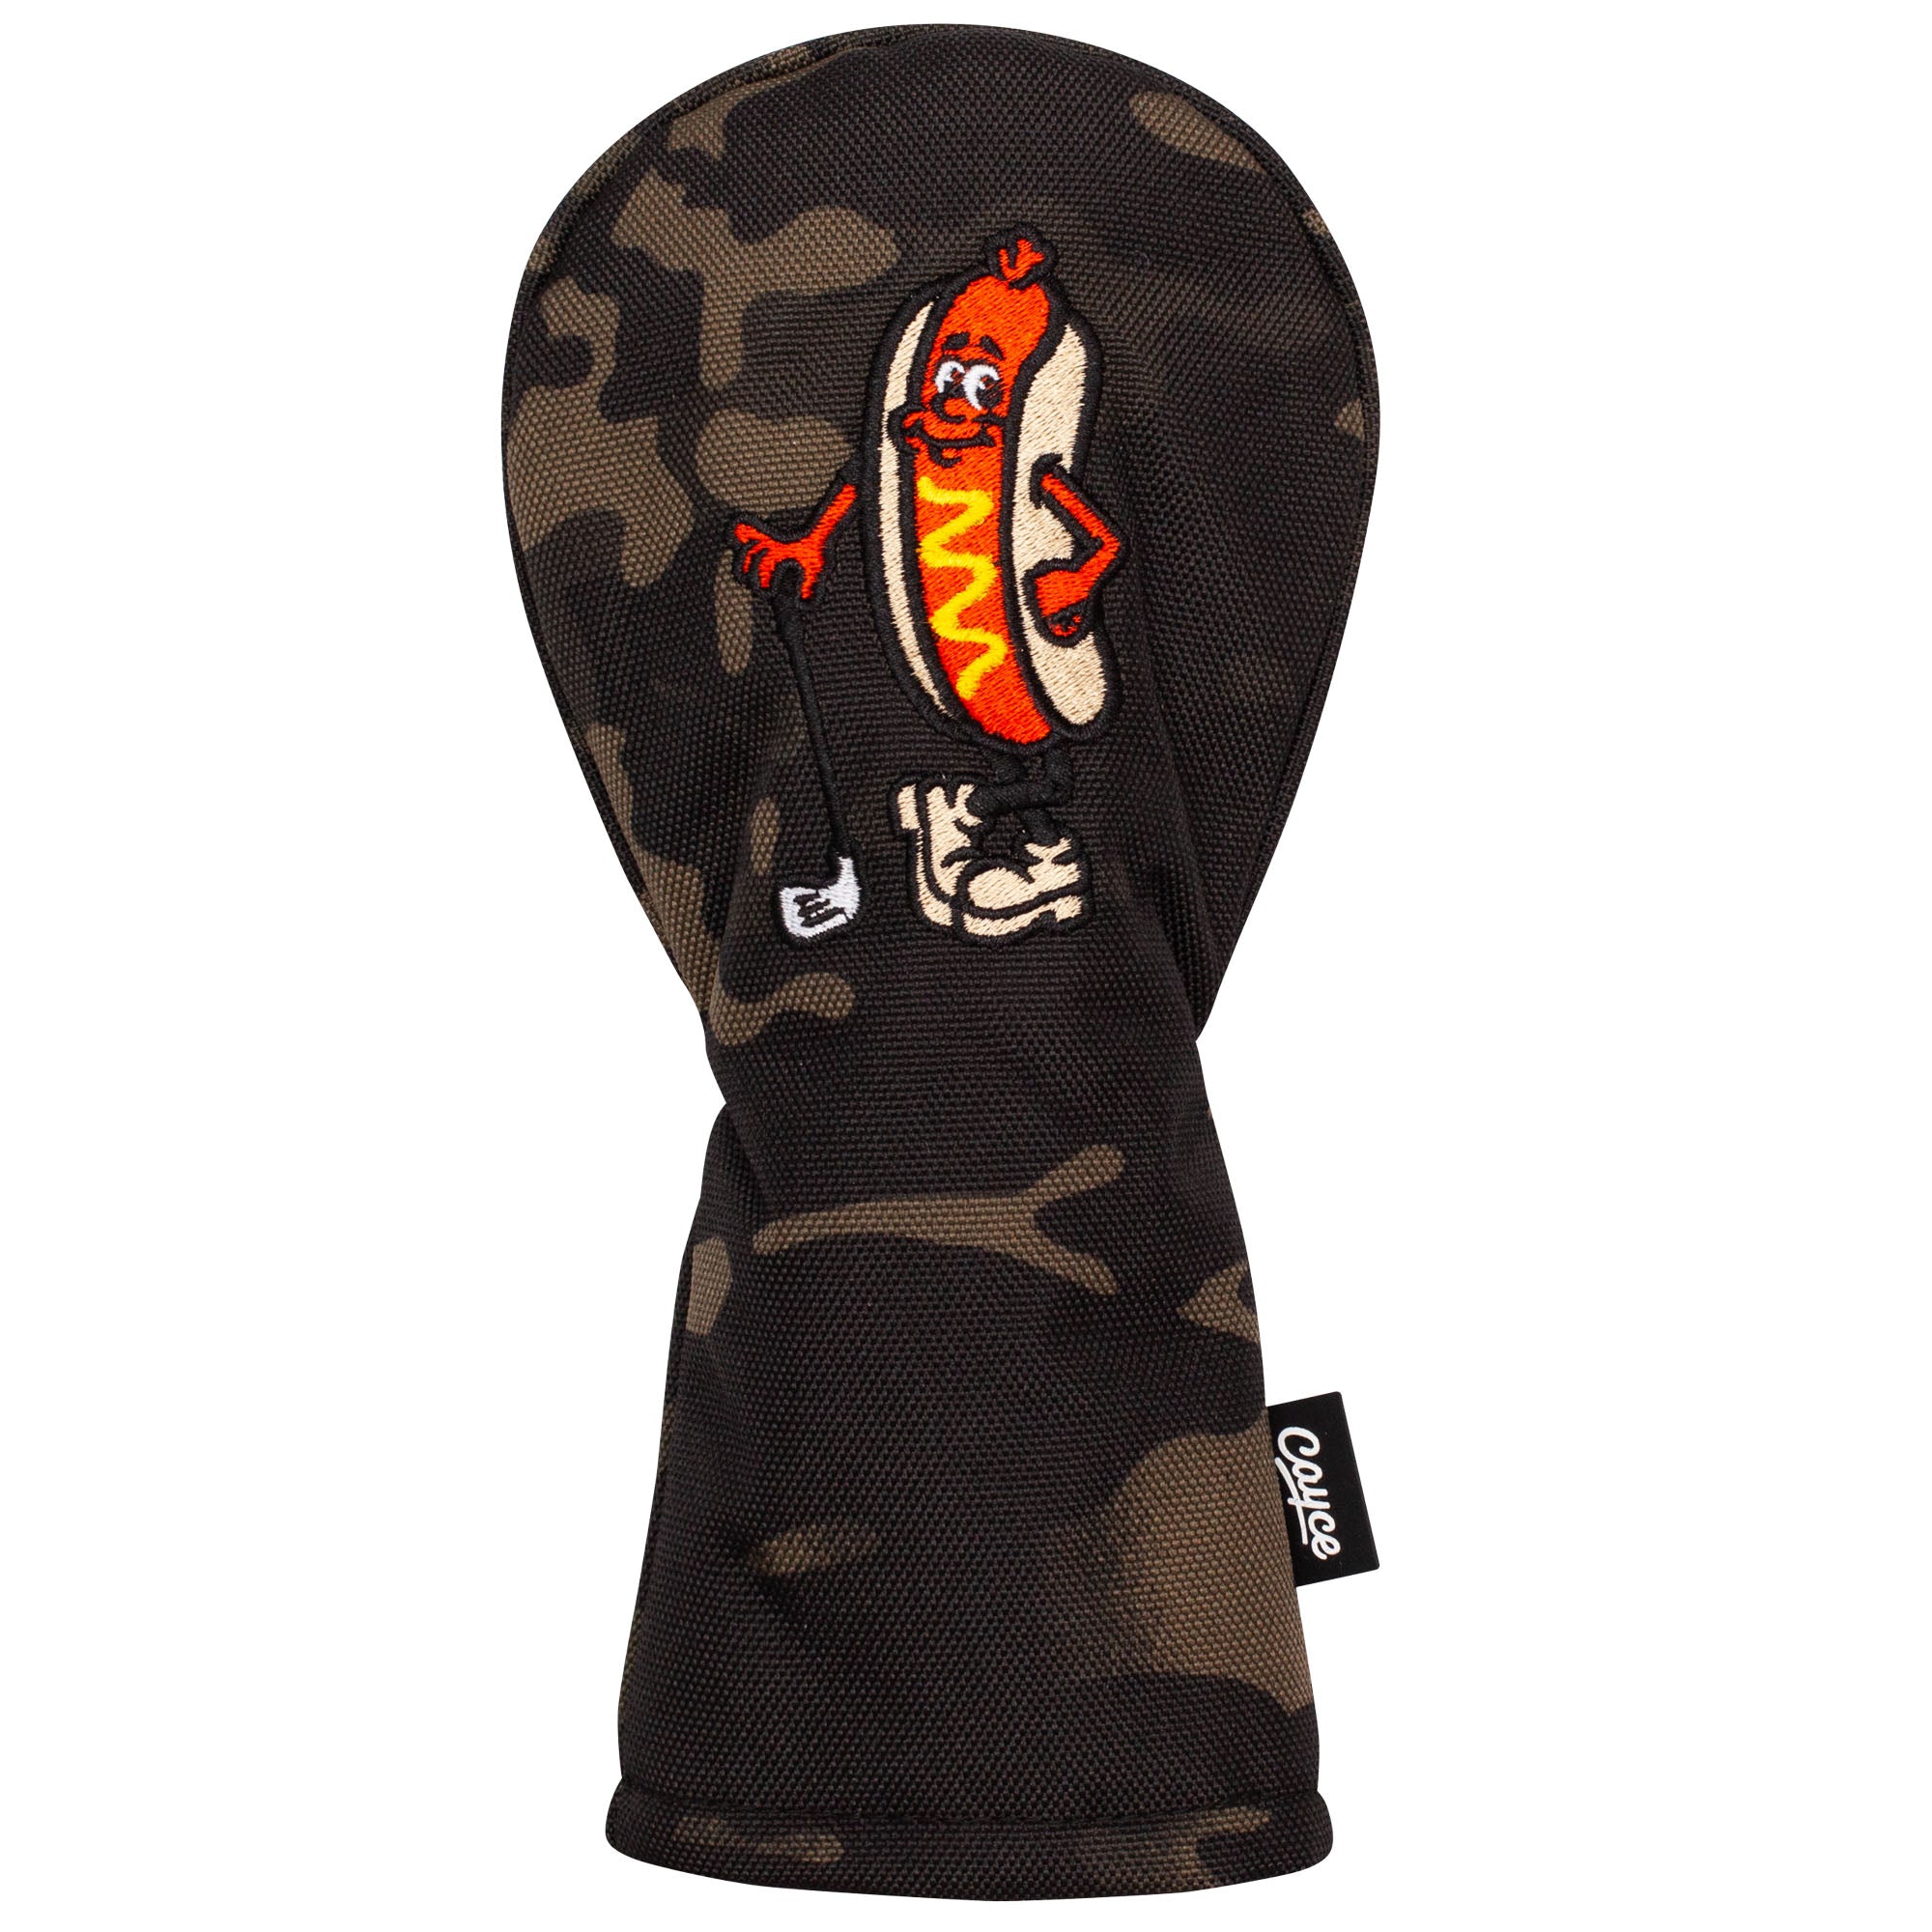 A camouflage, hourglass-shaped hybrid headcover cover for golf with embroidered hot dog golfer on the top. 